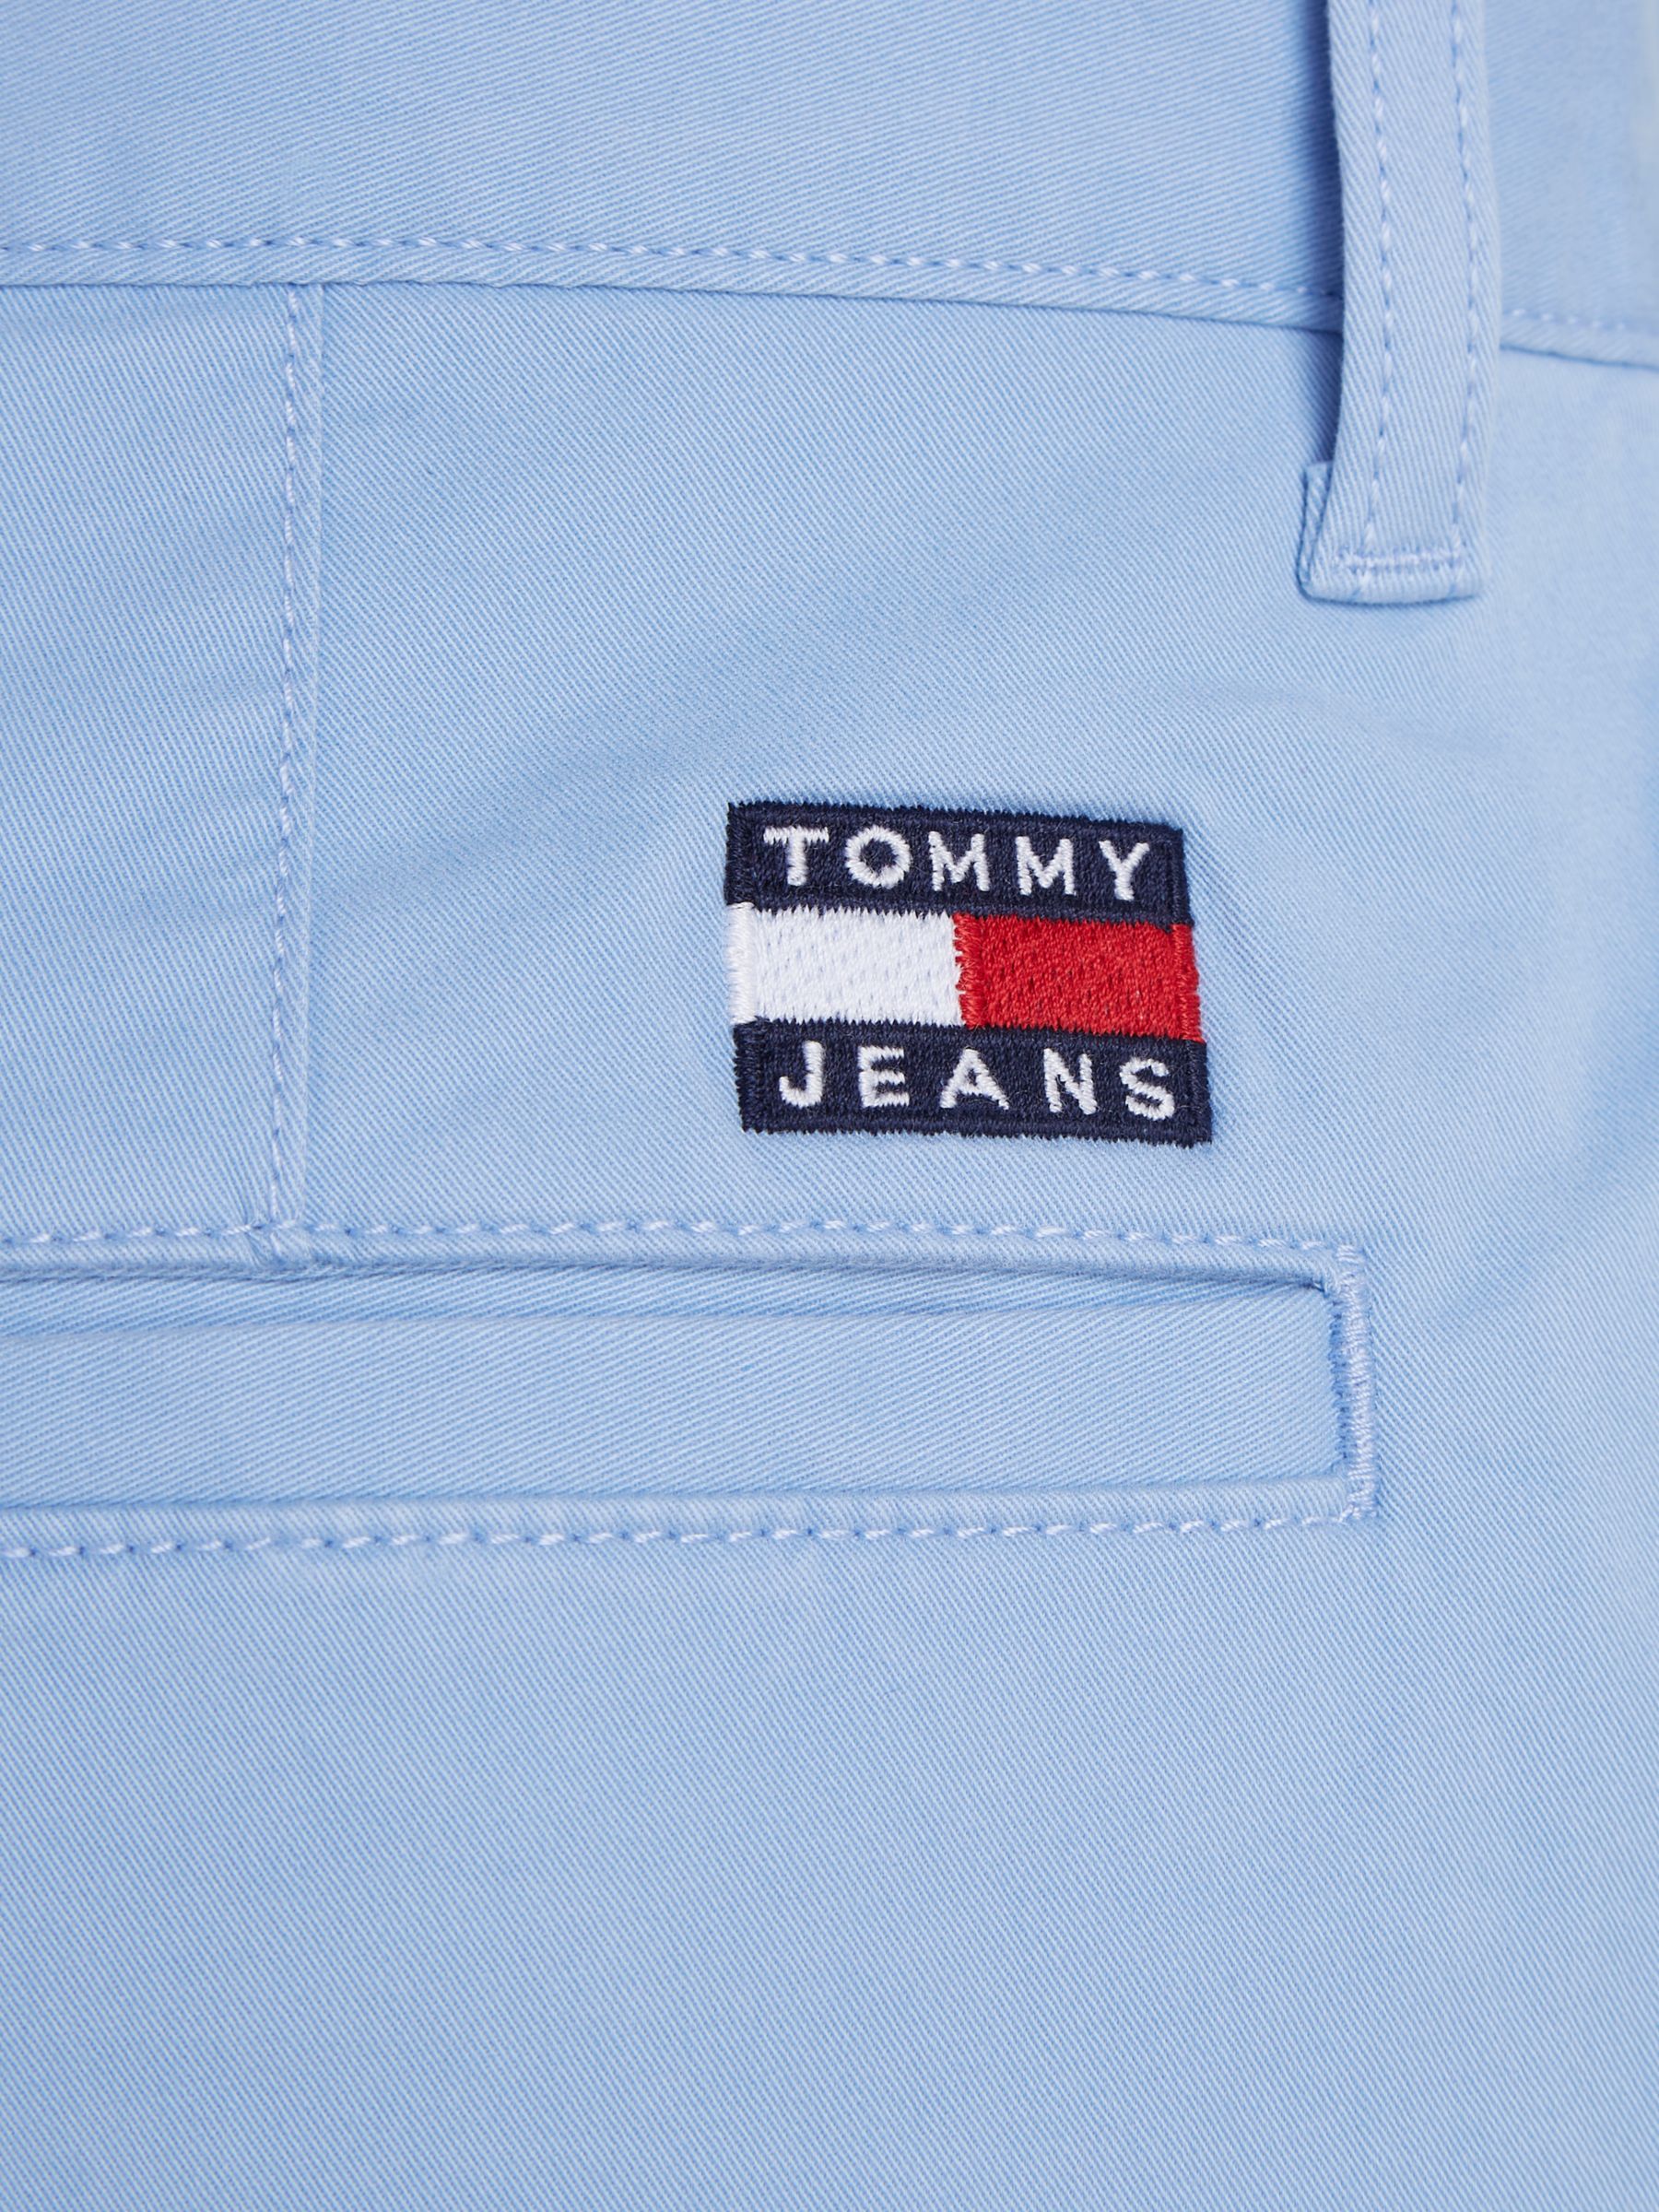 Tommy Jeans Scanton Chino Shorts, Moderate Blue, 30R